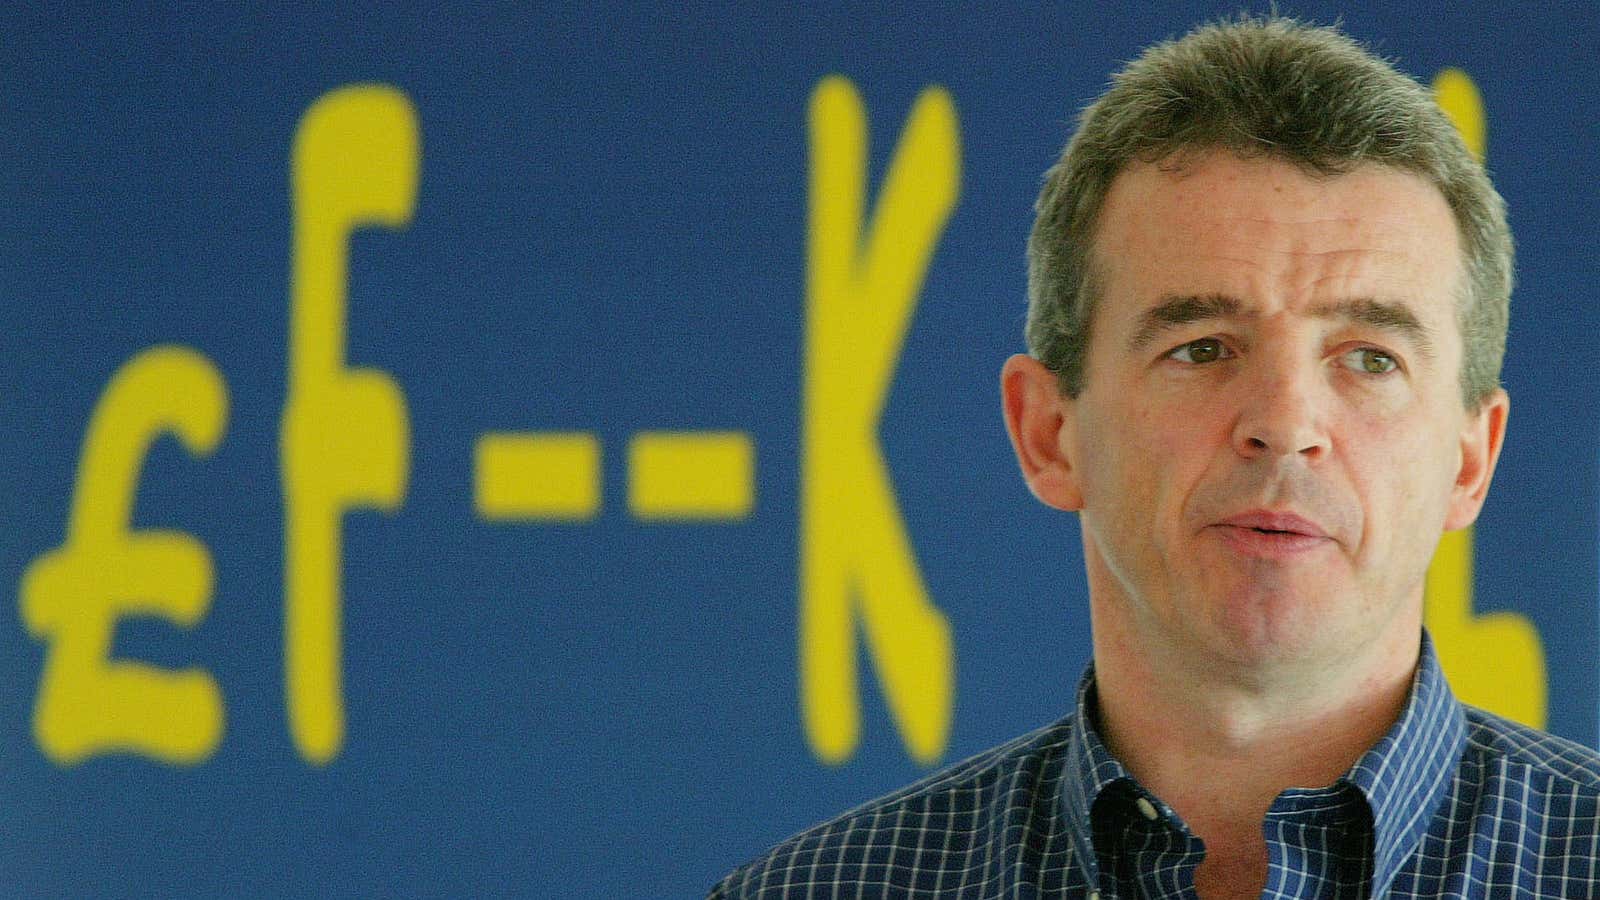 Ryanair boss Michael O’Leary rarely minces words.